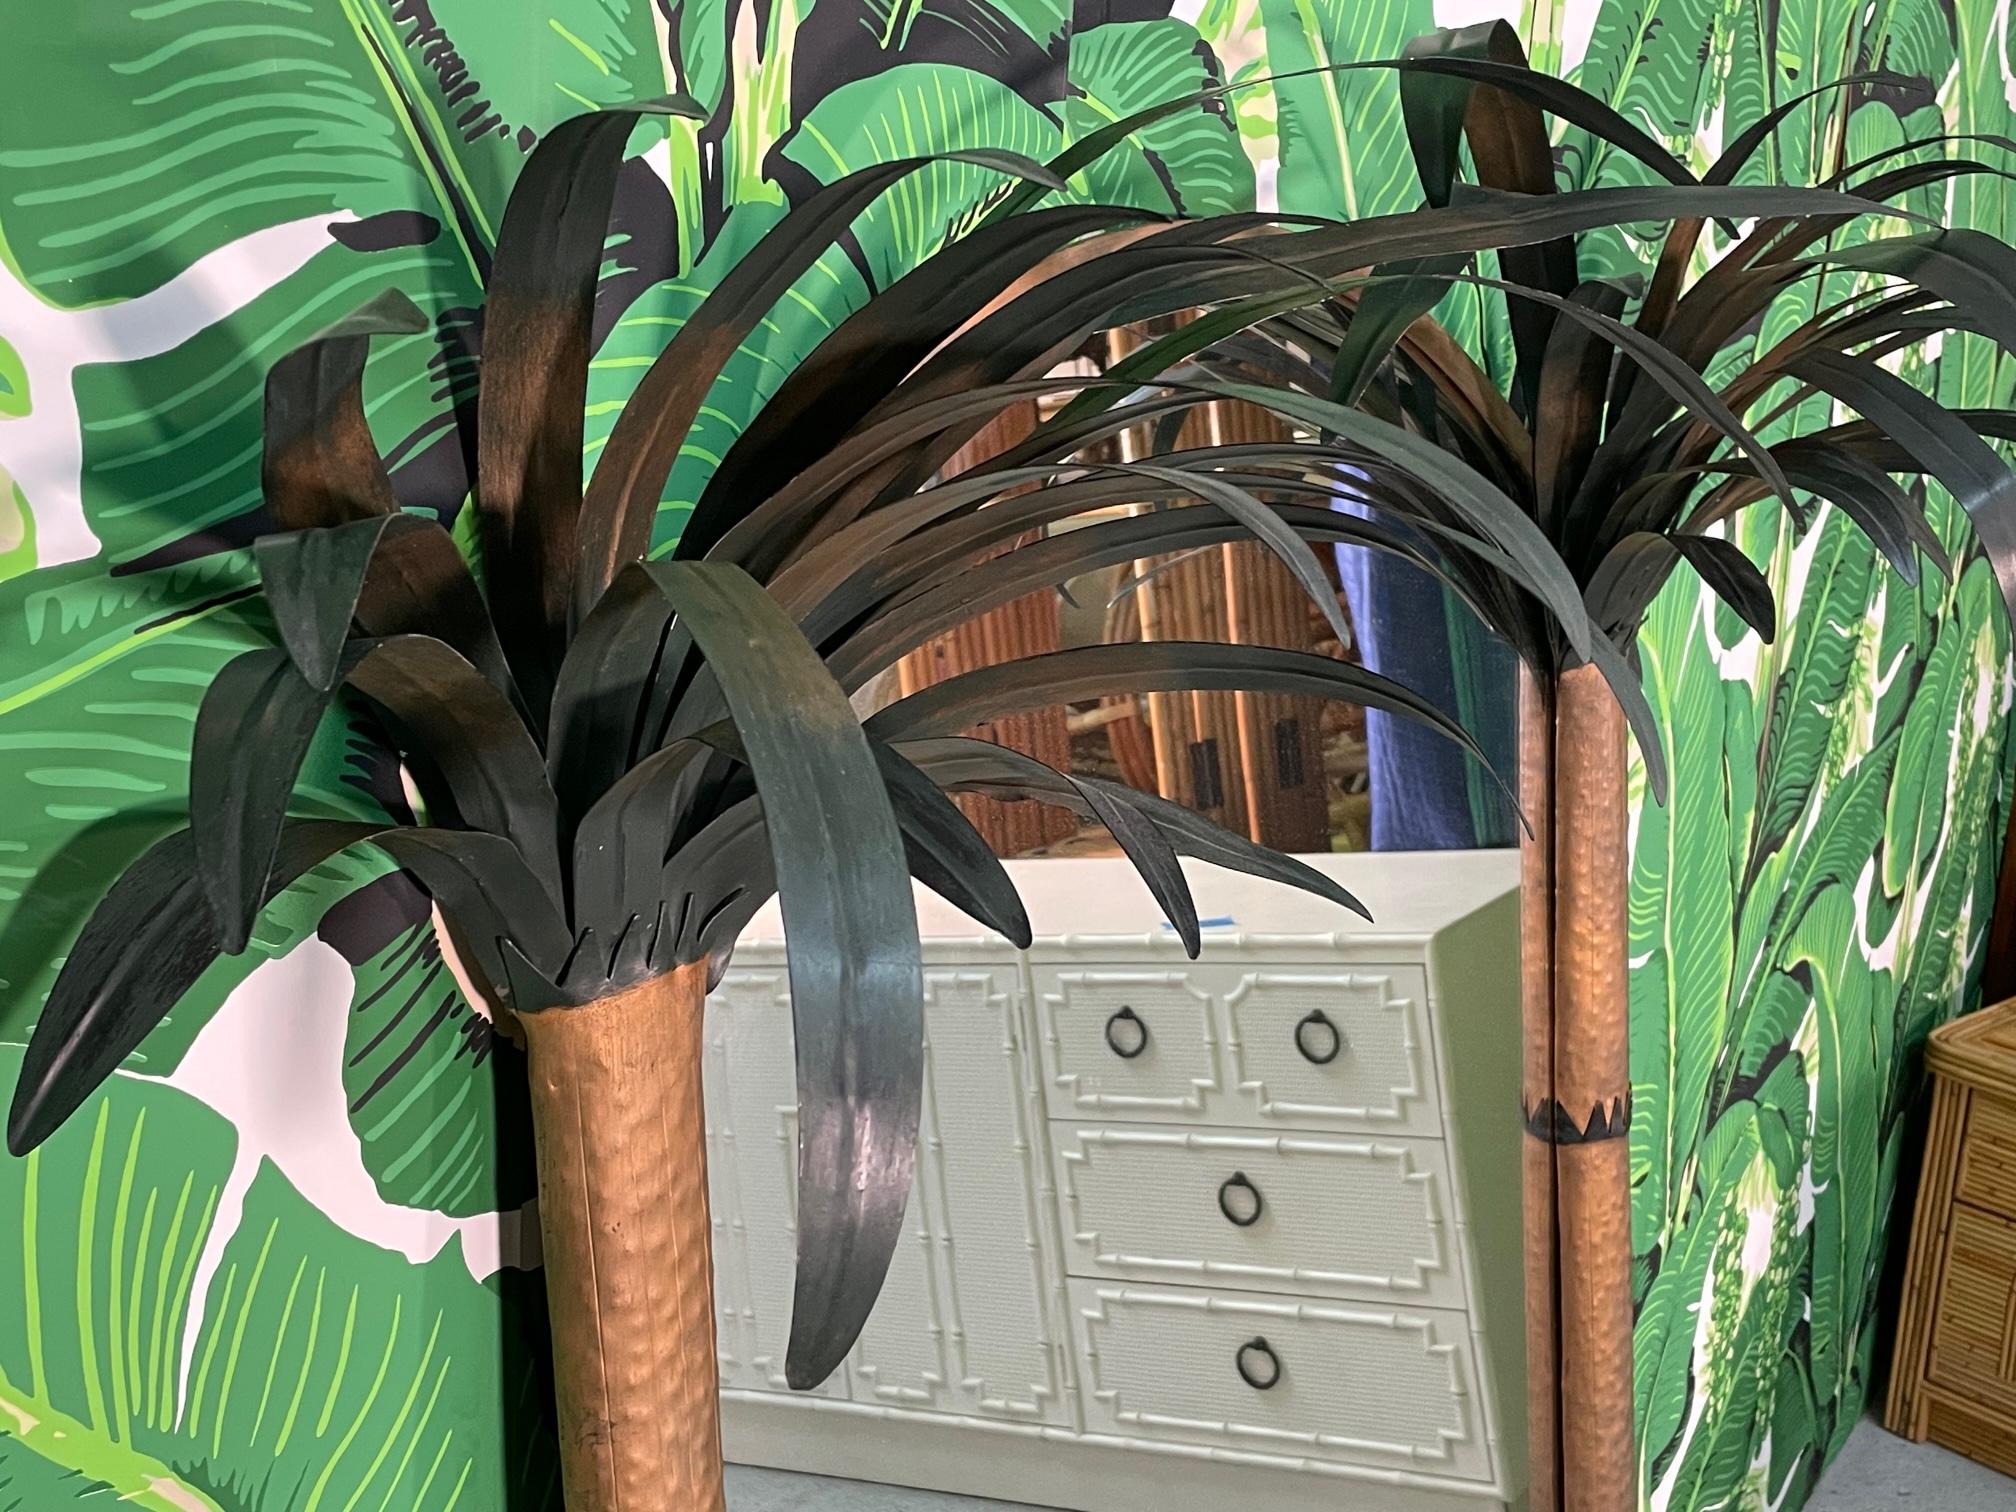 Large Hollywood Regency style wall mirror features full metal frame and double columns designed as palm trees with tole palm fronds. Very good vintage condition with only minor imperfections consistent with age (see photos). Total measurement is